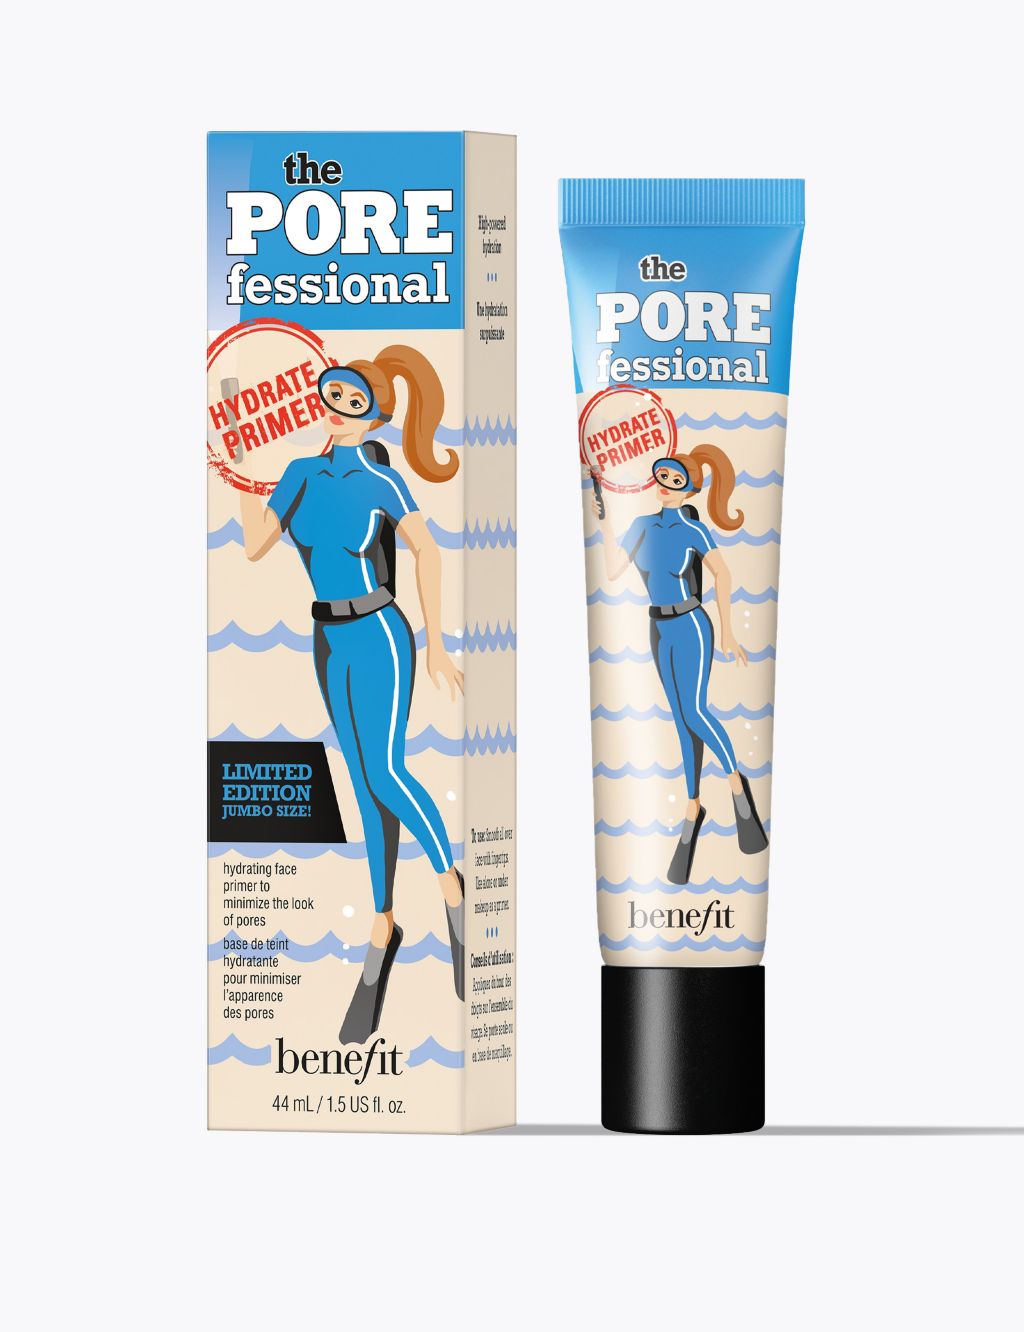 The POREfessional Hydrate Face Primer Value Size 44ml